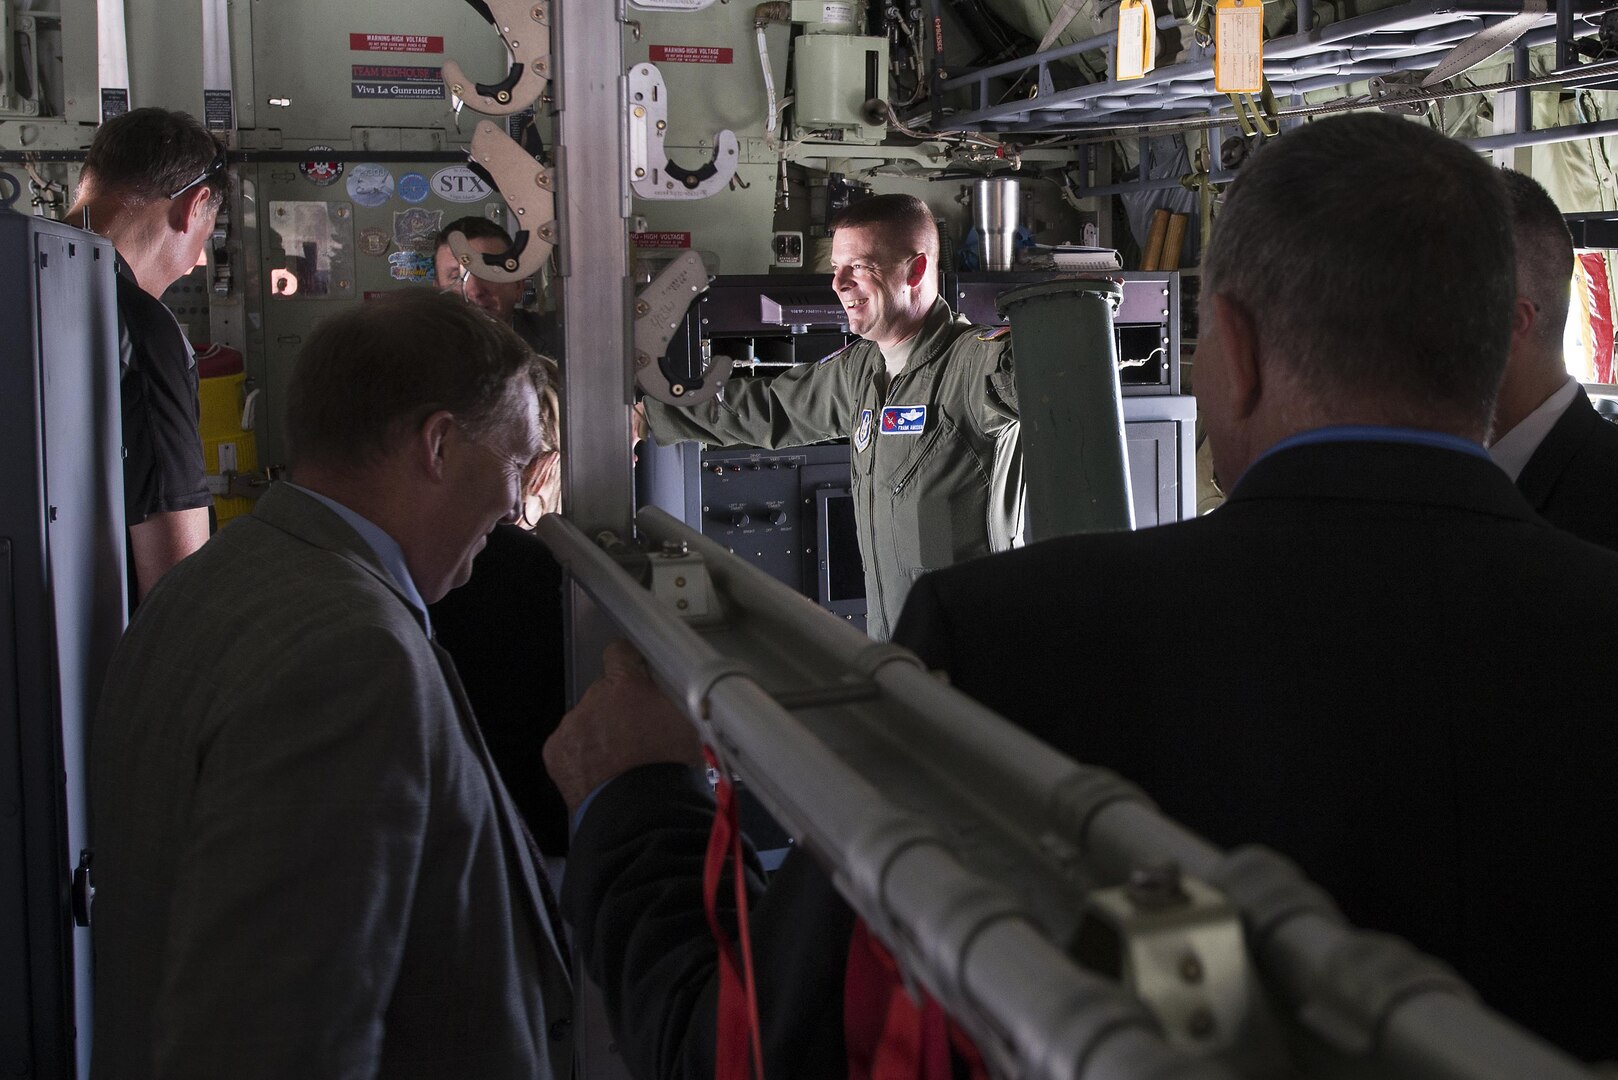 Col. Frank Amodeo, 403rd Wing commander, gives a tour of a WC-130J Hercules during the Hurricane Awareness Tour at the San Antonio International Airport May, 16, 2016. The WC-130J’s primary mission is hurricane hunting, but it is also used for basic cargo loading and aeromedical purposes during the off-season. 